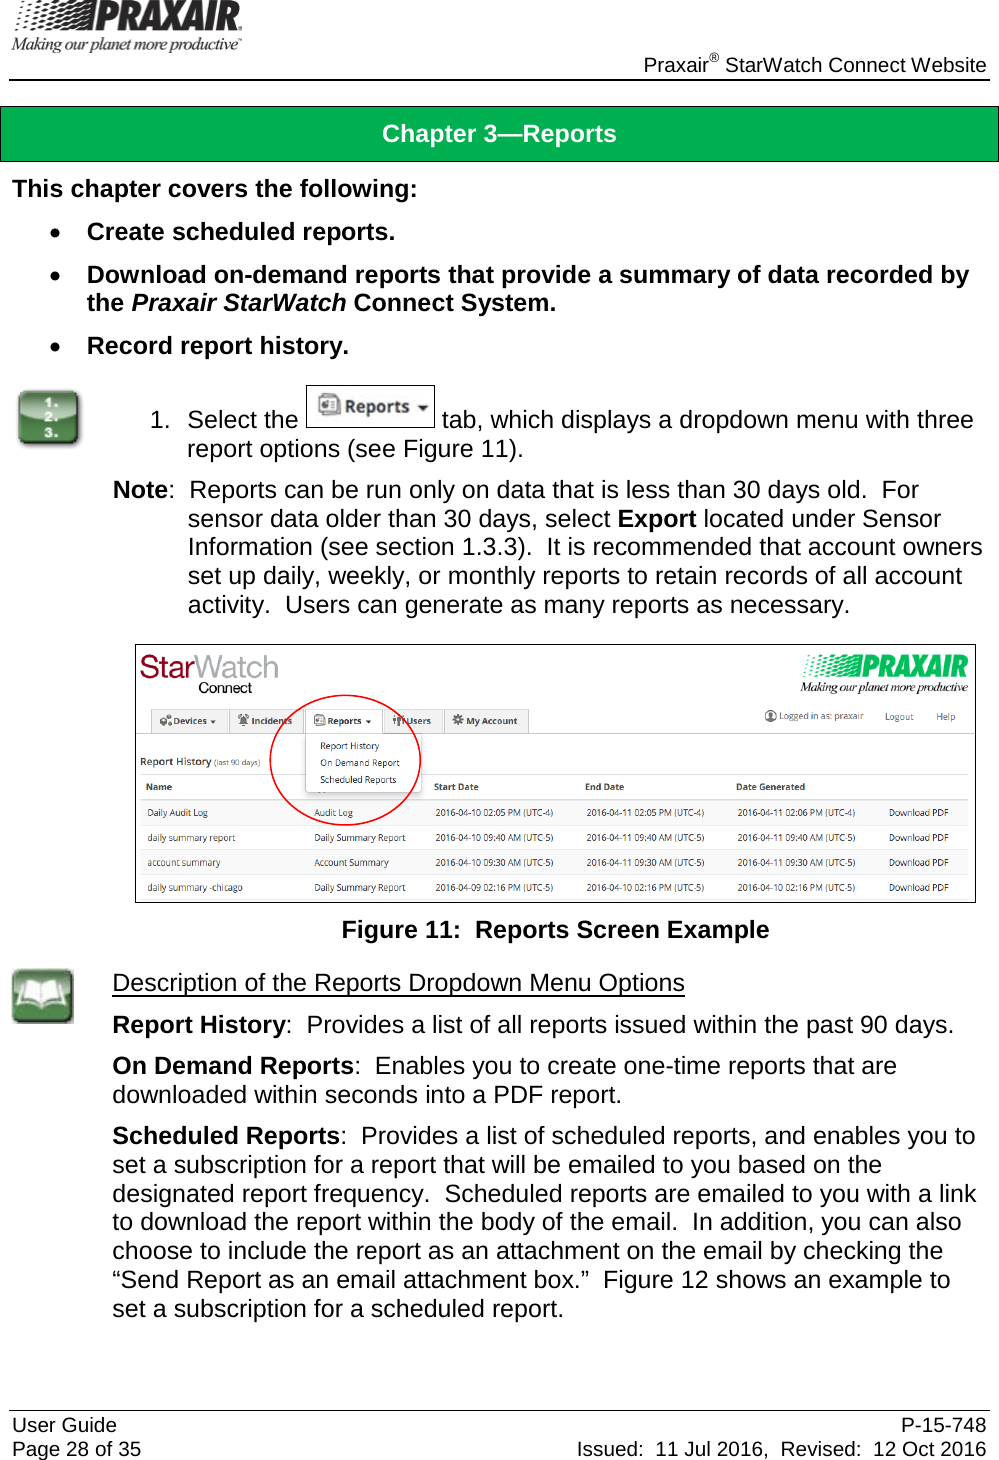    Praxair® StarWatch Connect Website User Guide  P-15-748 Page 28 of 35 Issued:  11 Jul 2016,  Revised:  12 Oct 2016 Chapter 3—Reports This chapter covers the following: • Create scheduled reports. • Download on-demand reports that provide a summary of data recorded by the Praxair StarWatch Connect System. • Record report history.  1. Select the   tab, which displays a dropdown menu with three report options (see Figure 11). Note:  Reports can be run only on data that is less than 30 days old.  For sensor data older than 30 days, select Export located under Sensor Information (see section 1.3.3).  It is recommended that account owners set up daily, weekly, or monthly reports to retain records of all account activity.  Users can generate as many reports as necessary.   Figure 11:  Reports Screen Example  Description of the Reports Dropdown Menu Options Report History:  Provides a list of all reports issued within the past 90 days. On Demand Reports:  Enables you to create one-time reports that are downloaded within seconds into a PDF report. Scheduled Reports:  Provides a list of scheduled reports, and enables you to set a subscription for a report that will be emailed to you based on the designated report frequency.  Scheduled reports are emailed to you with a link to download the report within the body of the email.  In addition, you can also choose to include the report as an attachment on the email by checking the “Send Report as an email attachment box.”  Figure 12 shows an example to set a subscription for a scheduled report. 